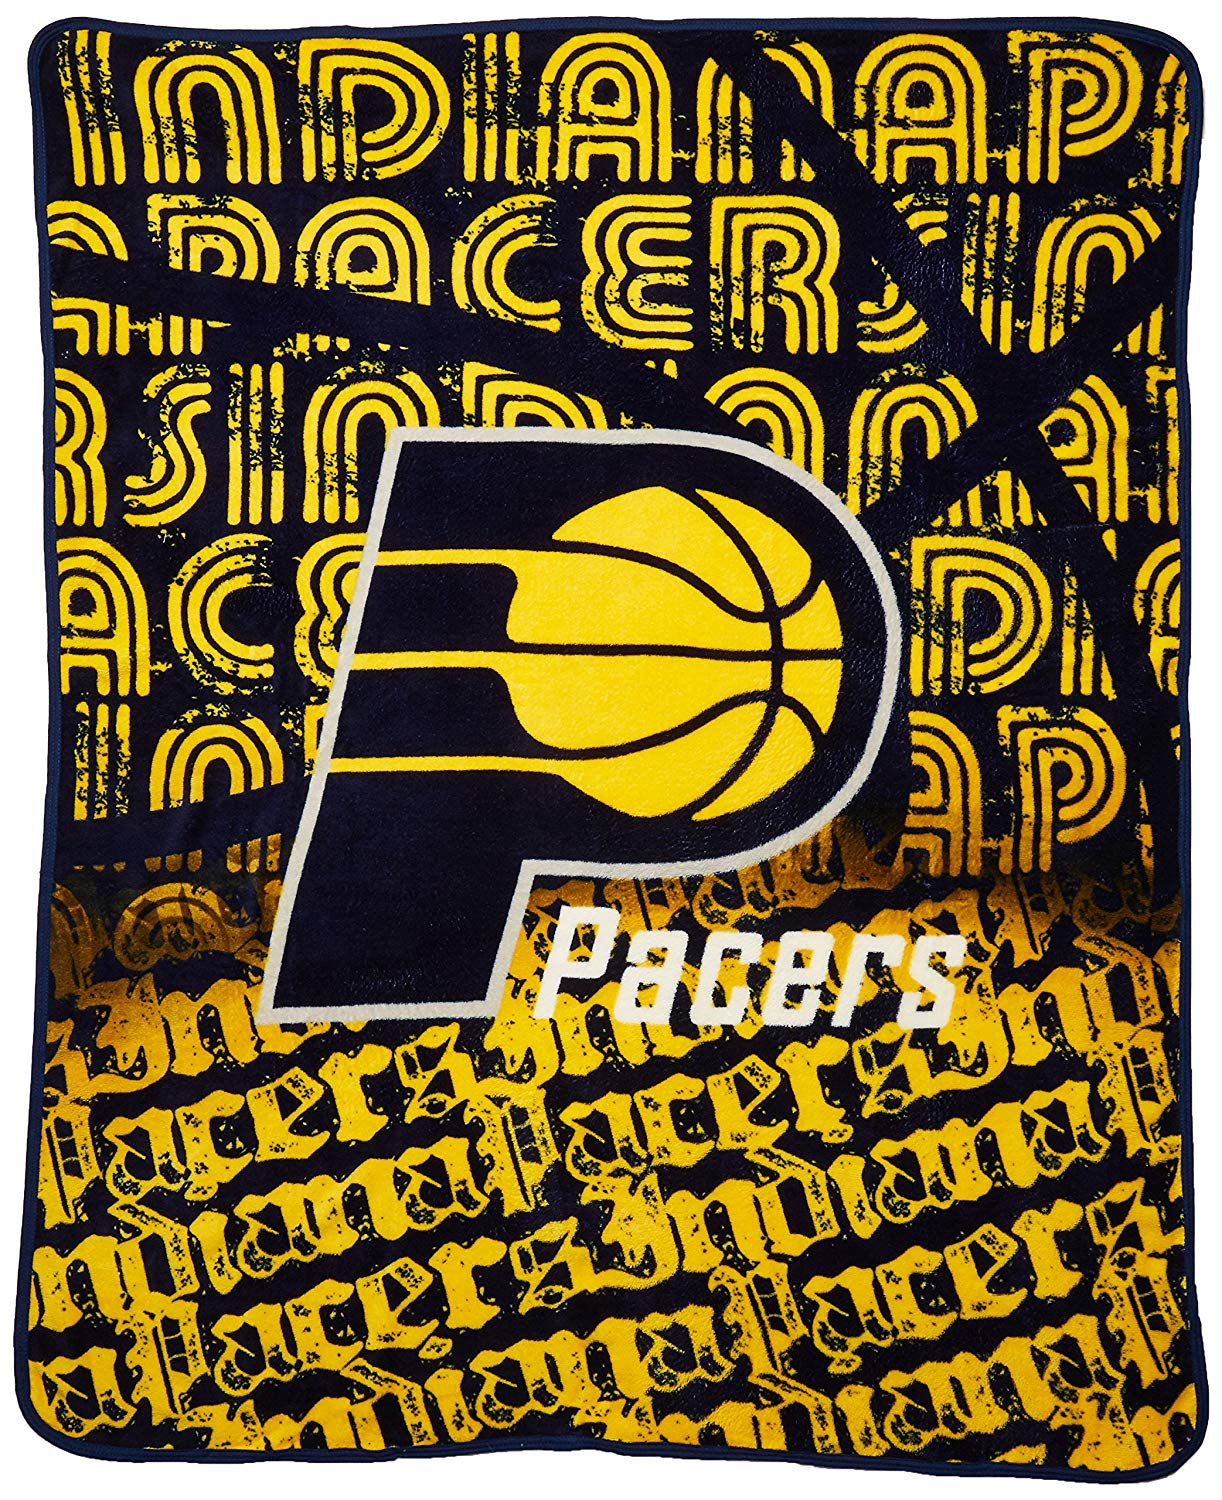 Indiana Pacers Blanket 46x60 Micro Raschel Redux Design Rolled - Special Order